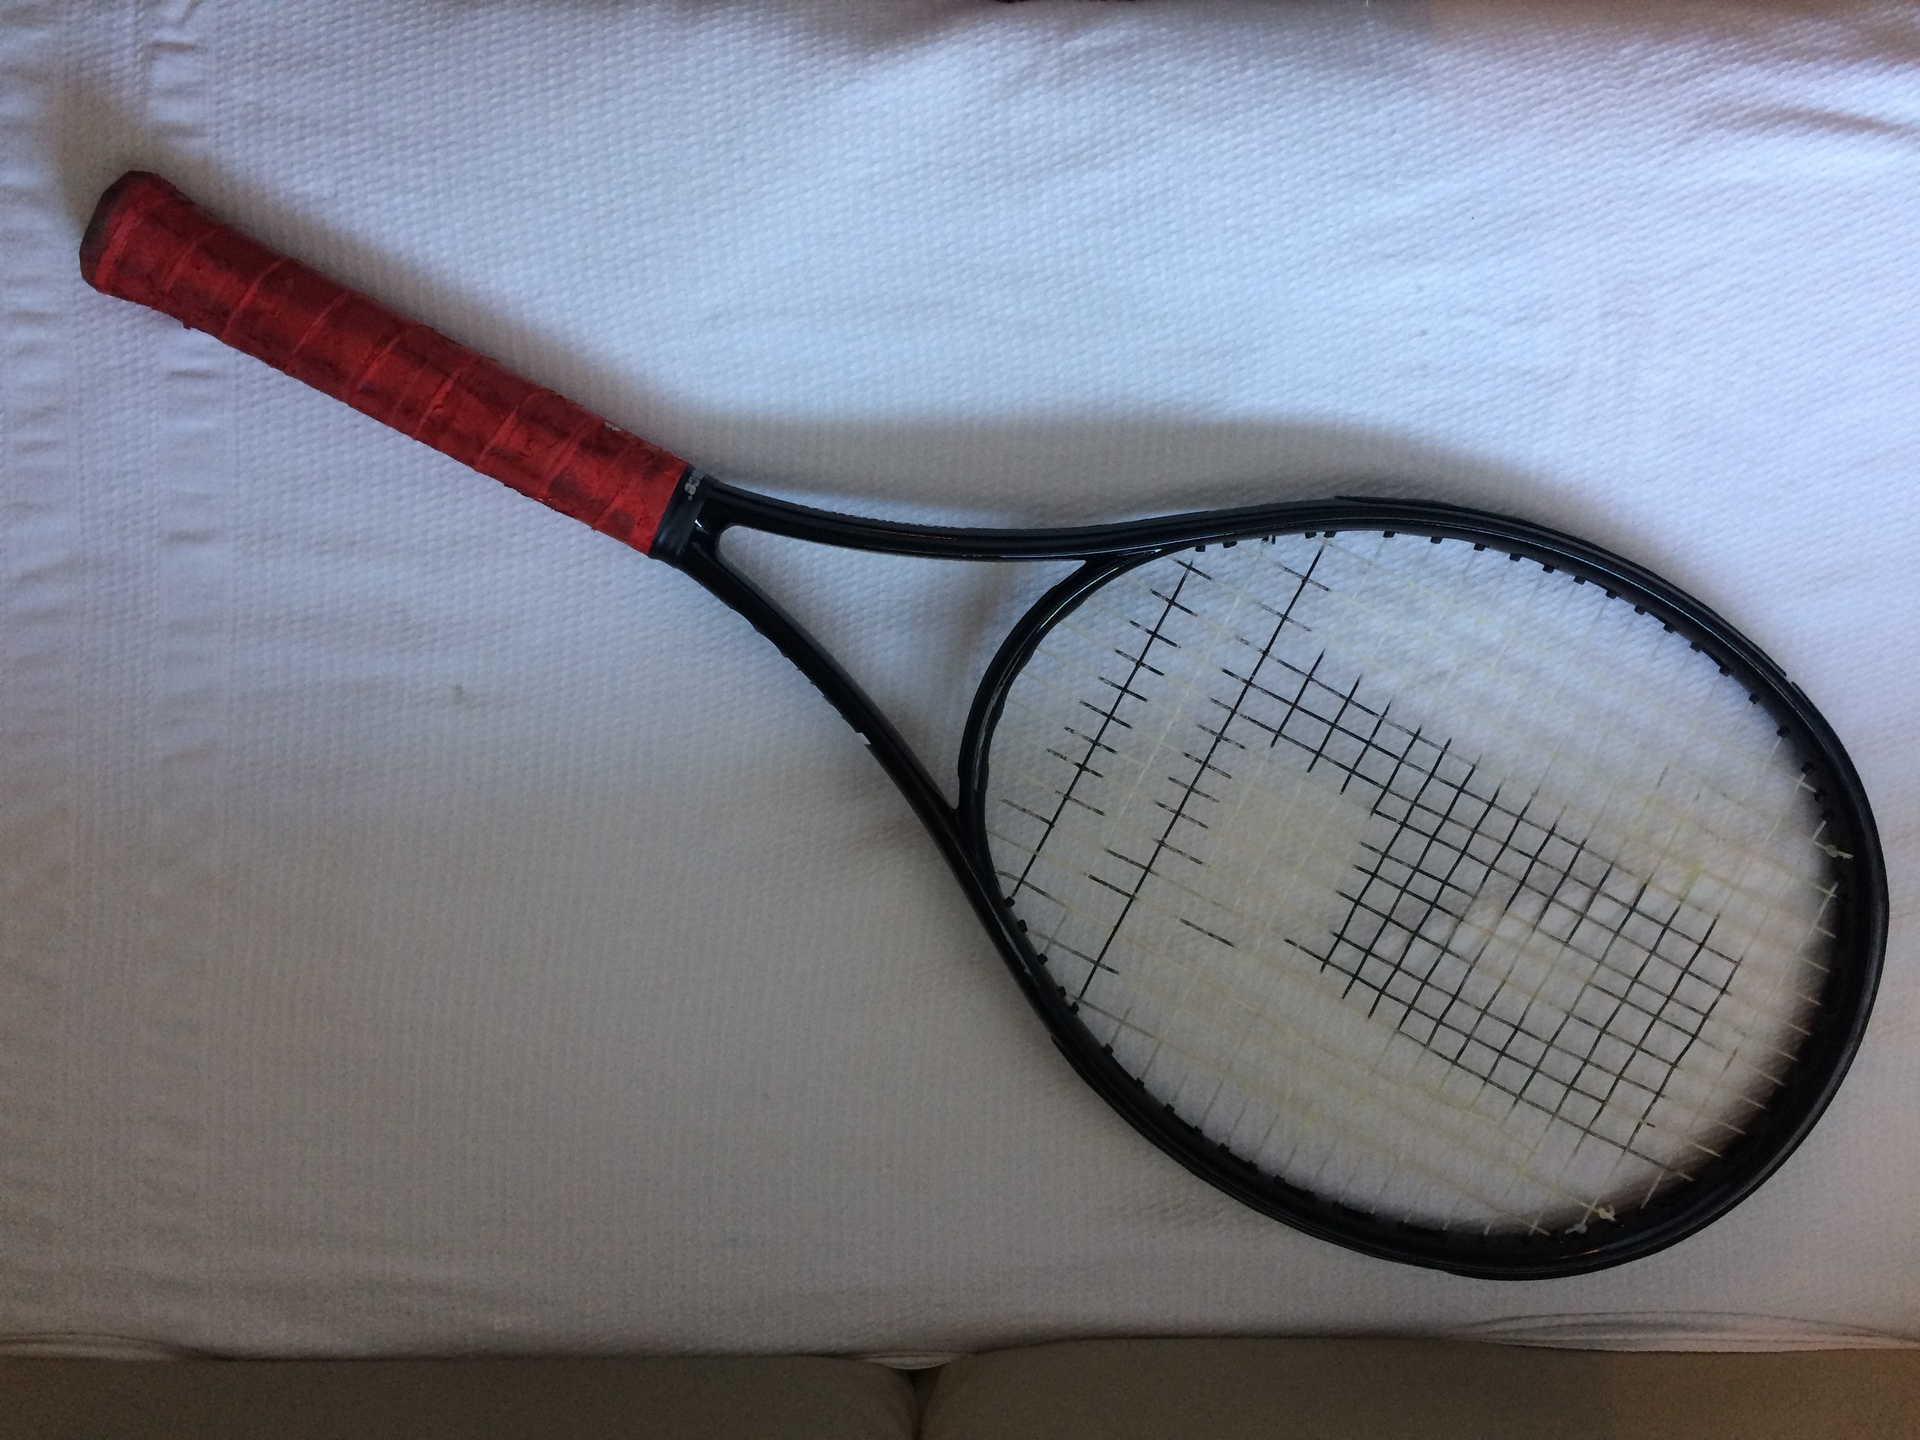 Prince Experimental TX200A-100 TK2A: Pro stock Tennis Rackets for Sale